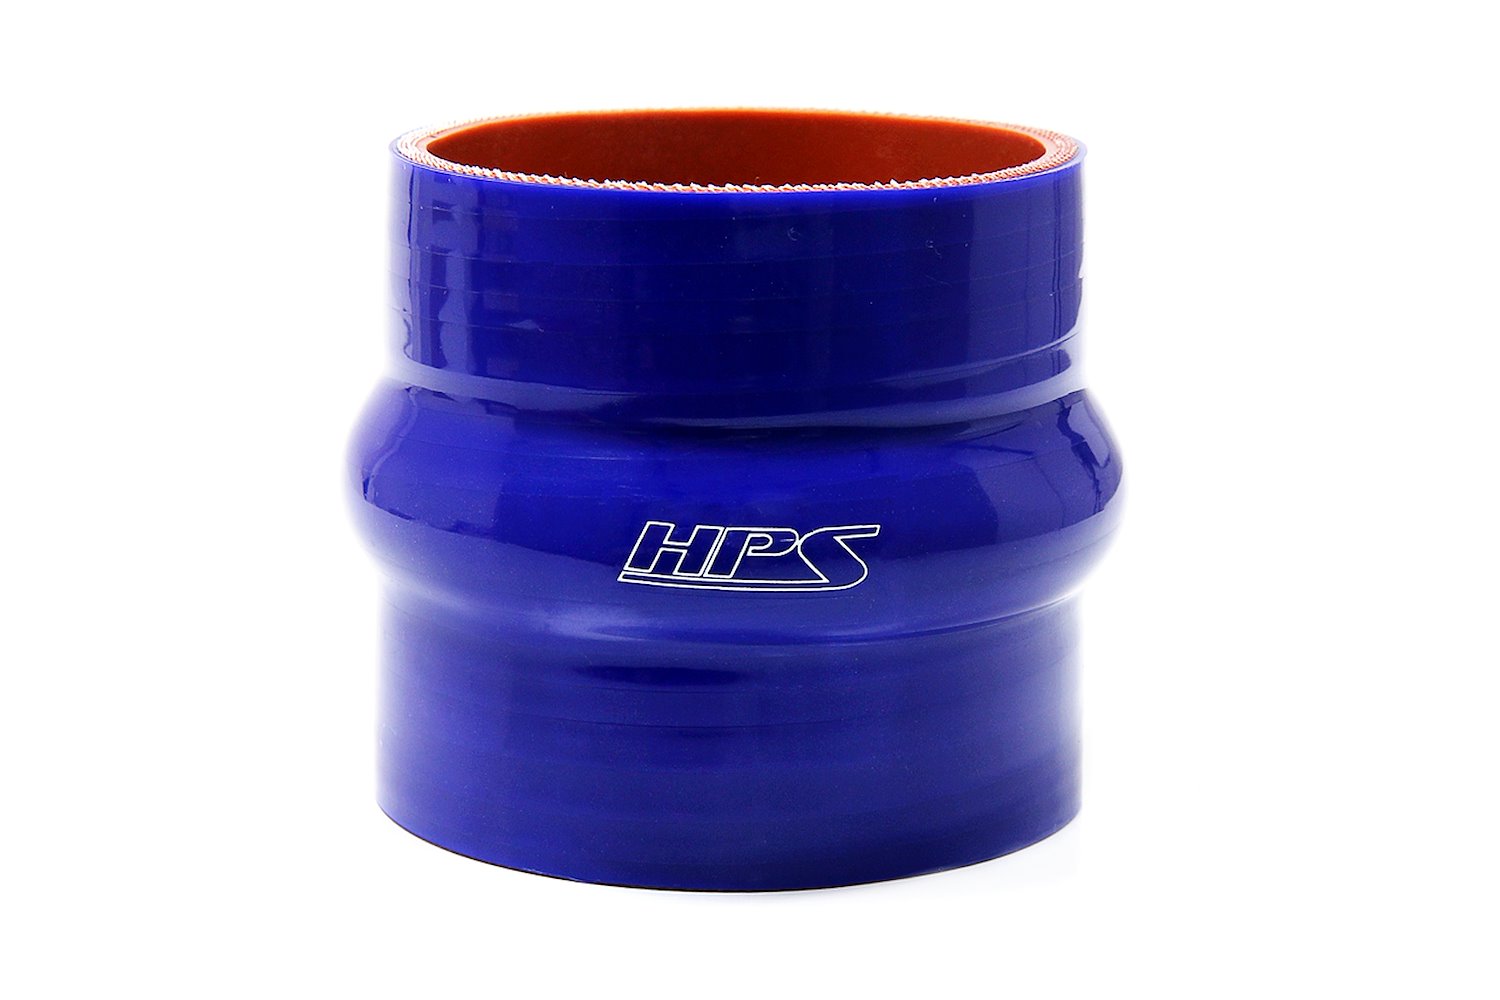 HTSHC-062-L6-BLUE Silicone Hump Coupler Hose, High-Temp 4-Ply Reinforced, 5/8 in. ID, 6 in. Long, Blue